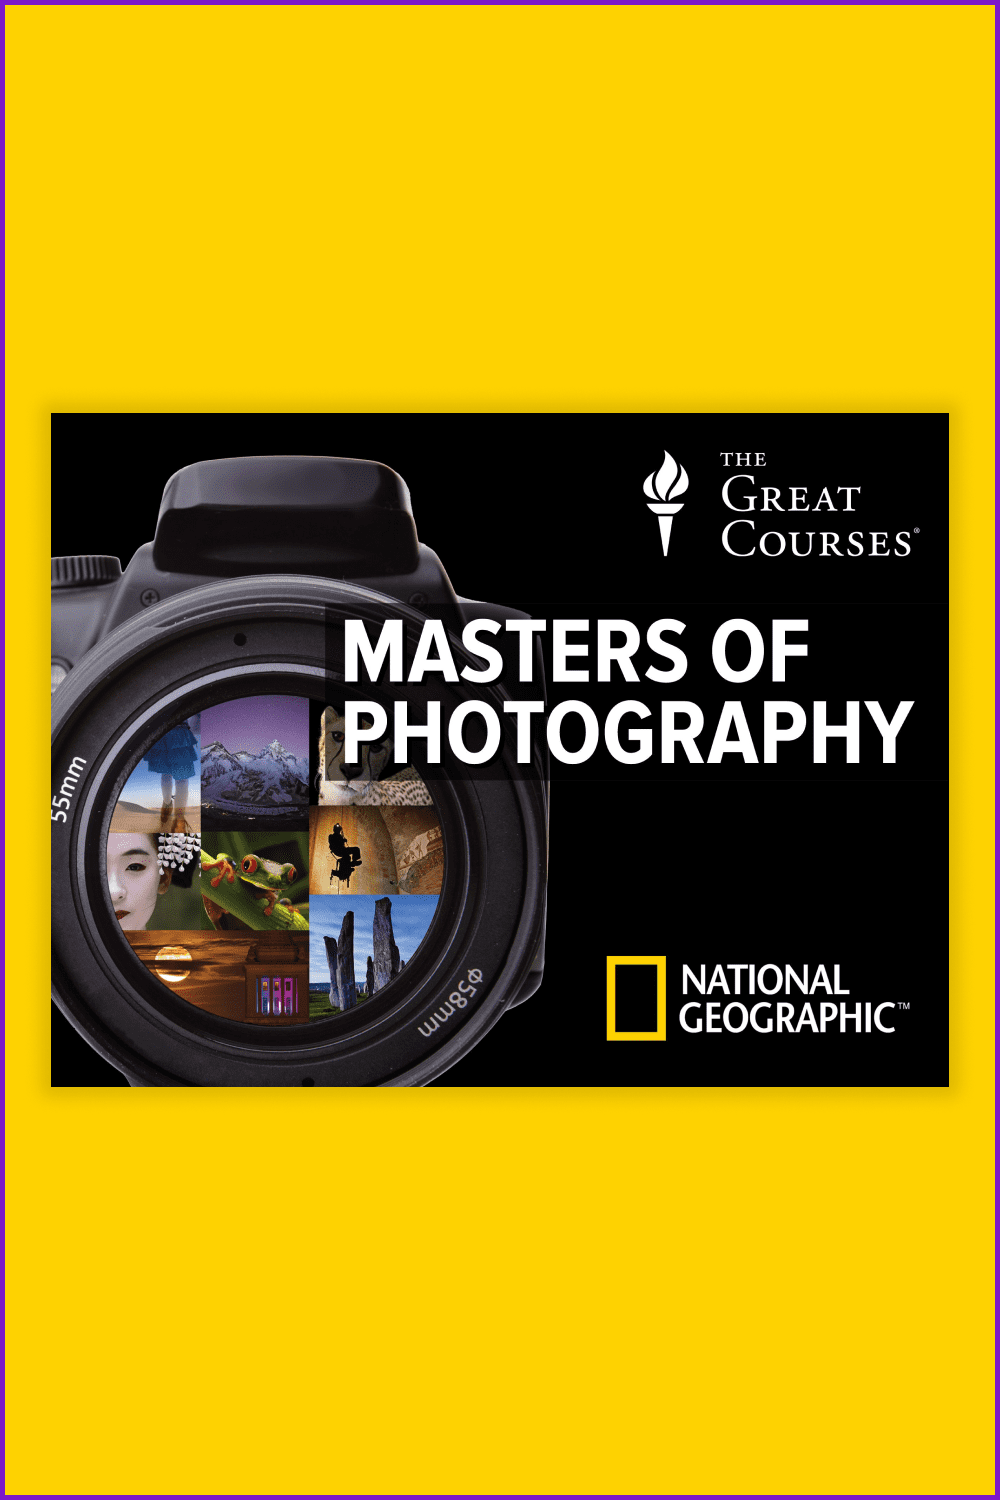 National Geographic Masters of Photography.